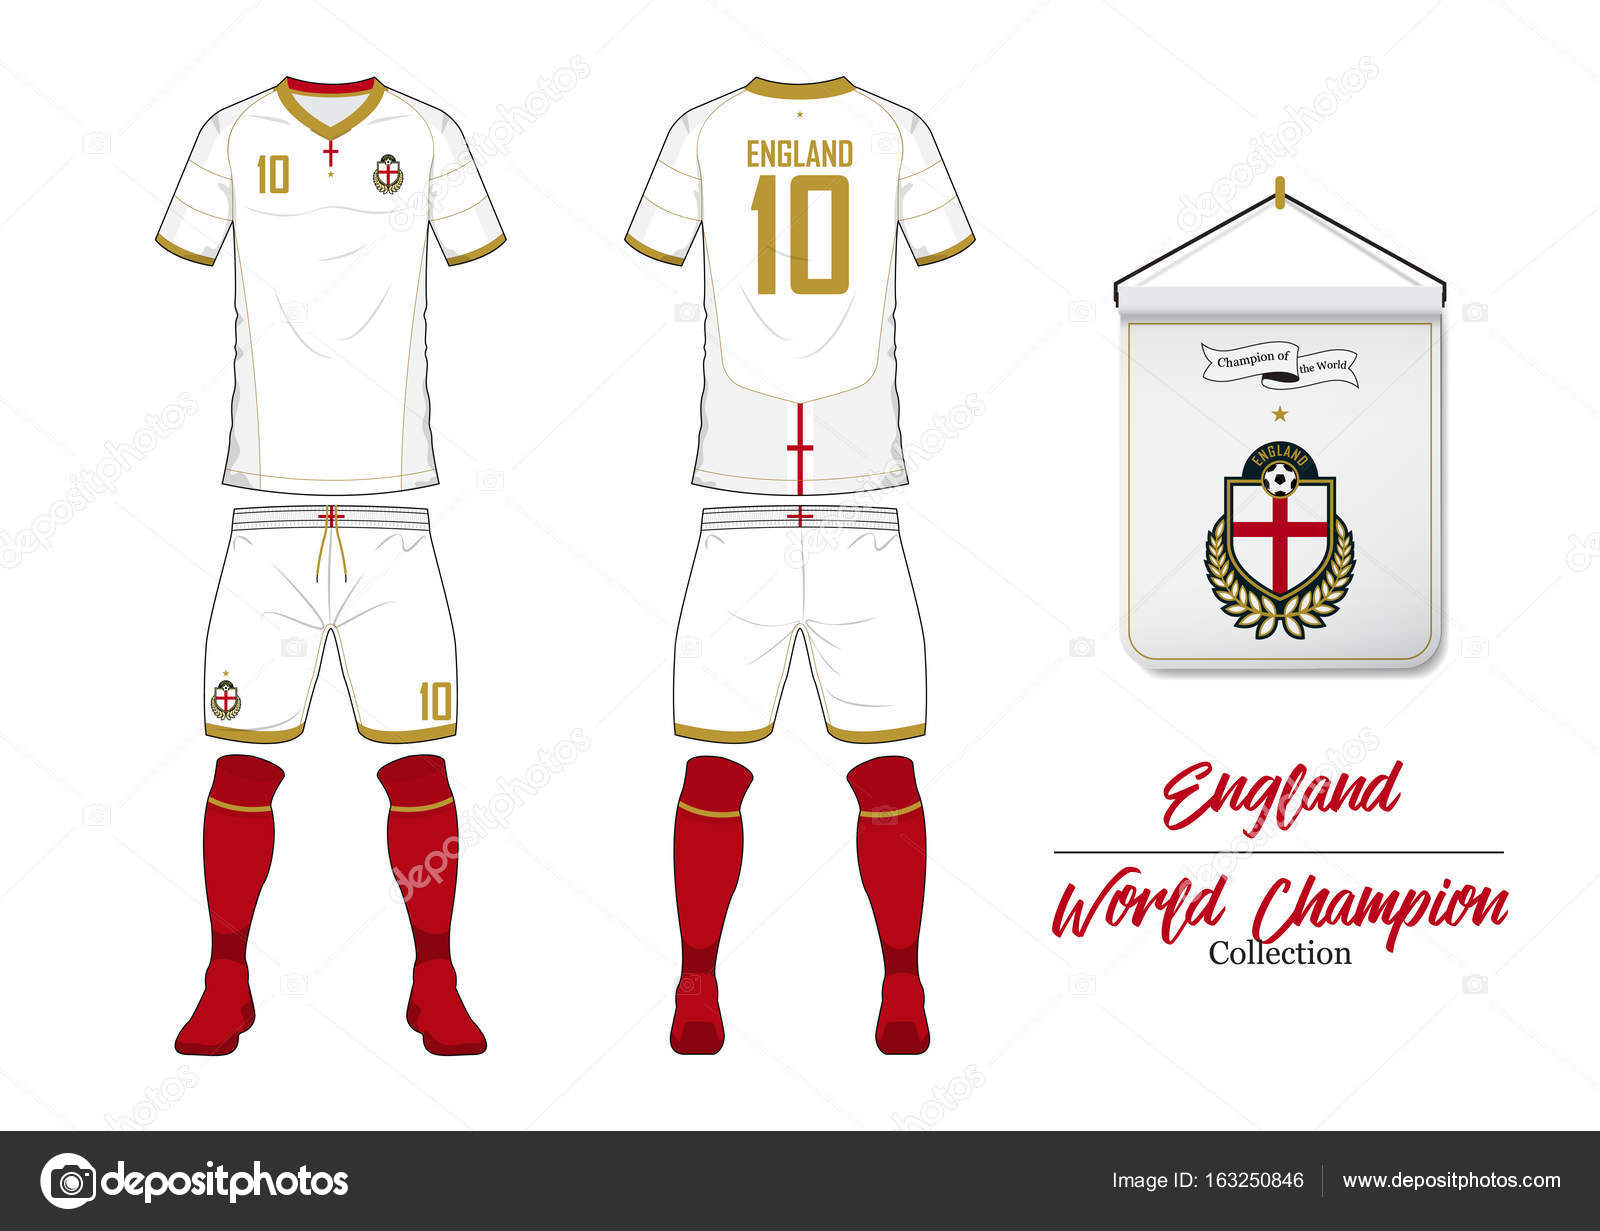 Soccer Jersey Or Football Kit In World Championship Collection England Football National Team Football Logo With House Flag Sport Shirt Mock Up Front And Rear Soccer View Uniform Vector Vector Image